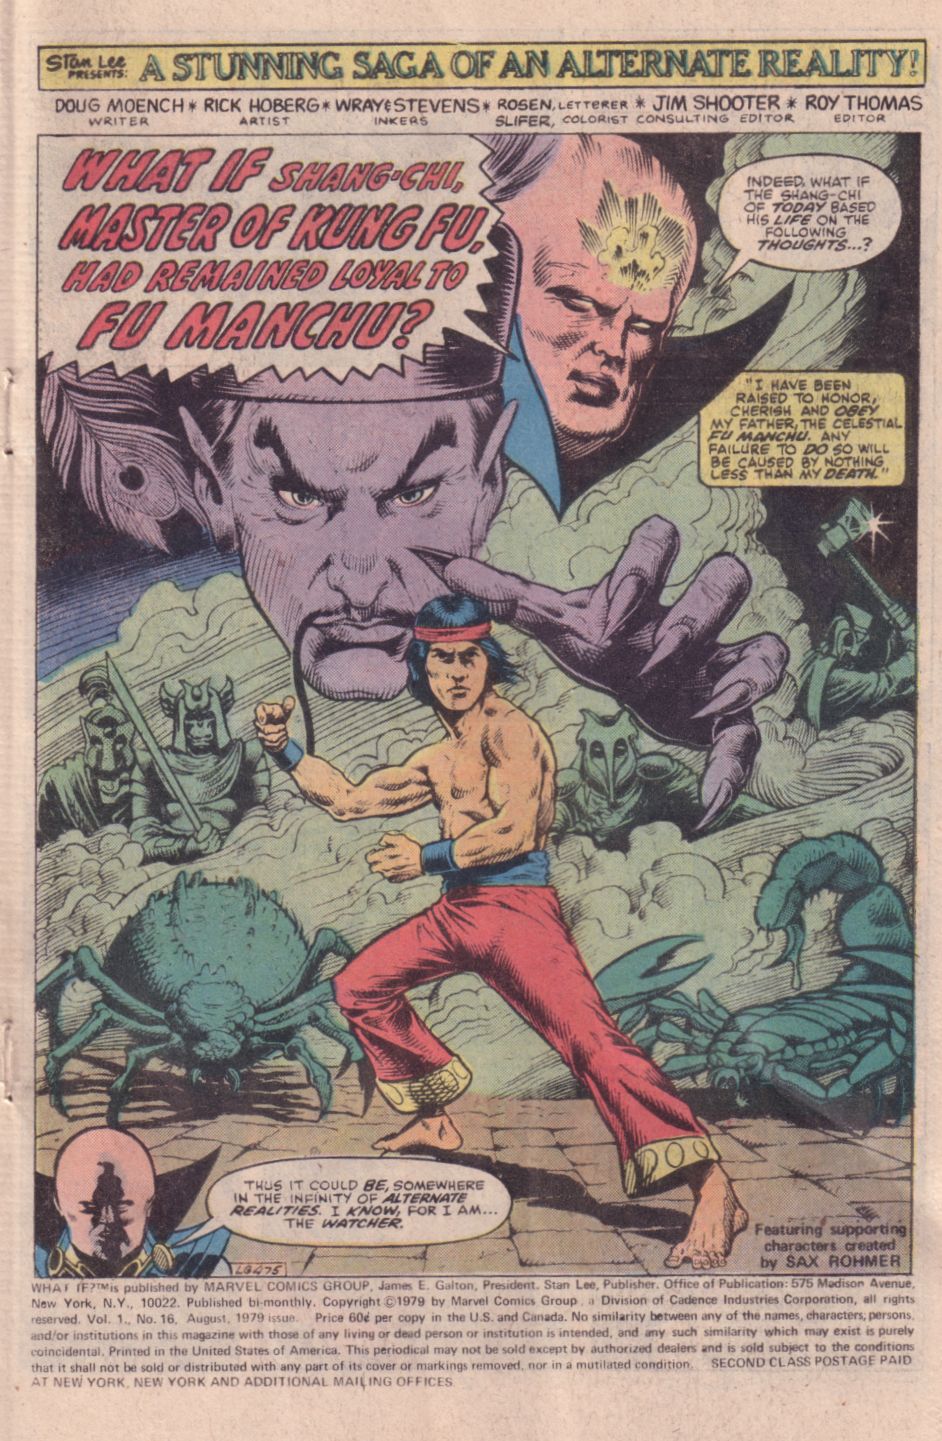 What If? (1977) issue 16 - Shang Chi Master of Kung Fu fought on The side of Fu Manchu - Page 2